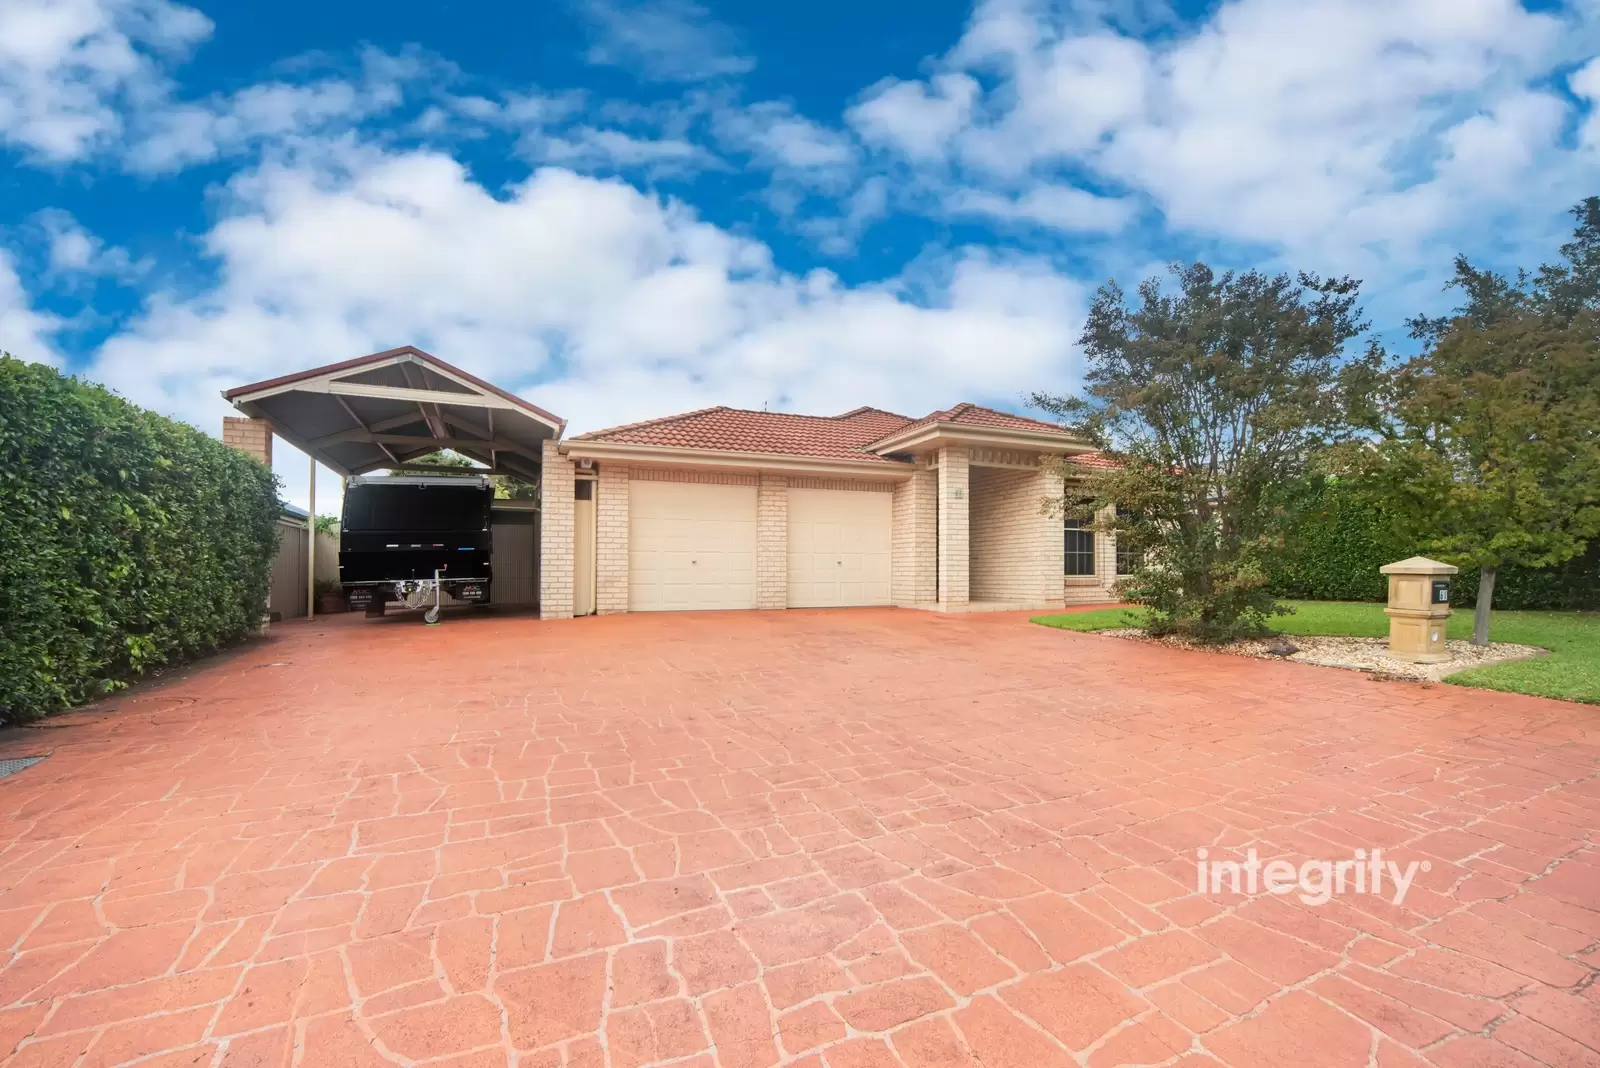 61 Bowerbird Street, South Nowra For Sale by Integrity Real Estate - image 1